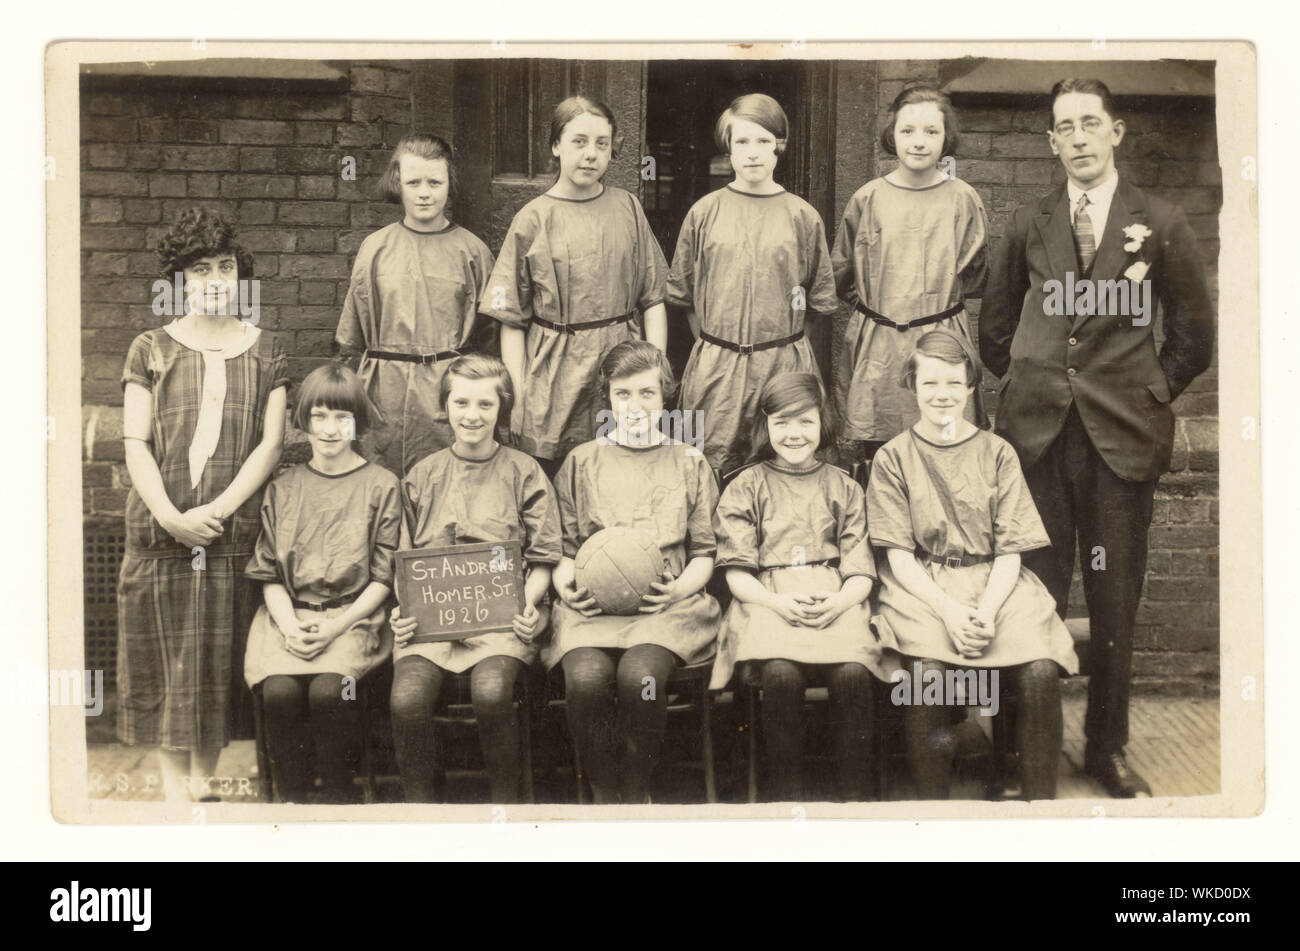 Early 1900's postcard of girl's netball team, smiling and looking happy, St. Andrew's school, Homer Street, Manchester, England, U.K. dated 1926 Stock Photo